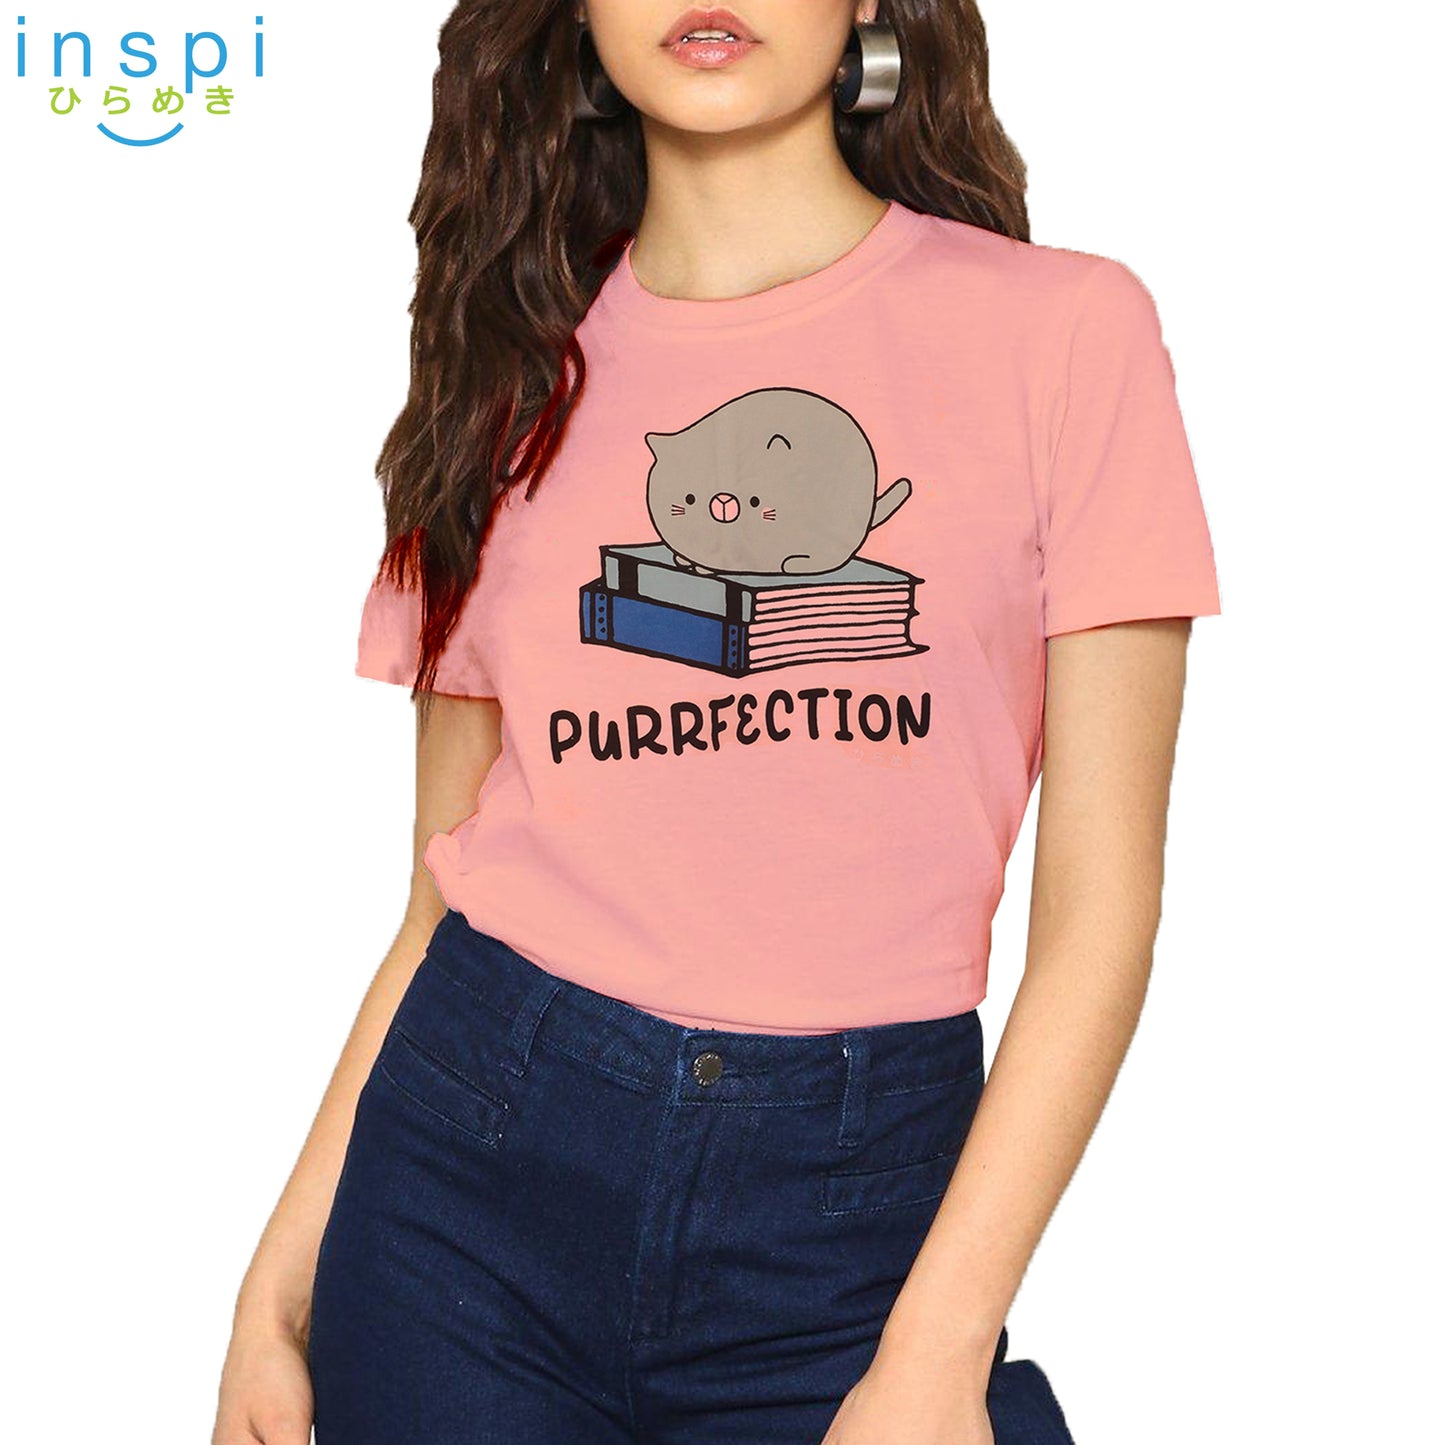 INSPI Tees Ladies Loose Fit Purrfection Graphic Tshirt